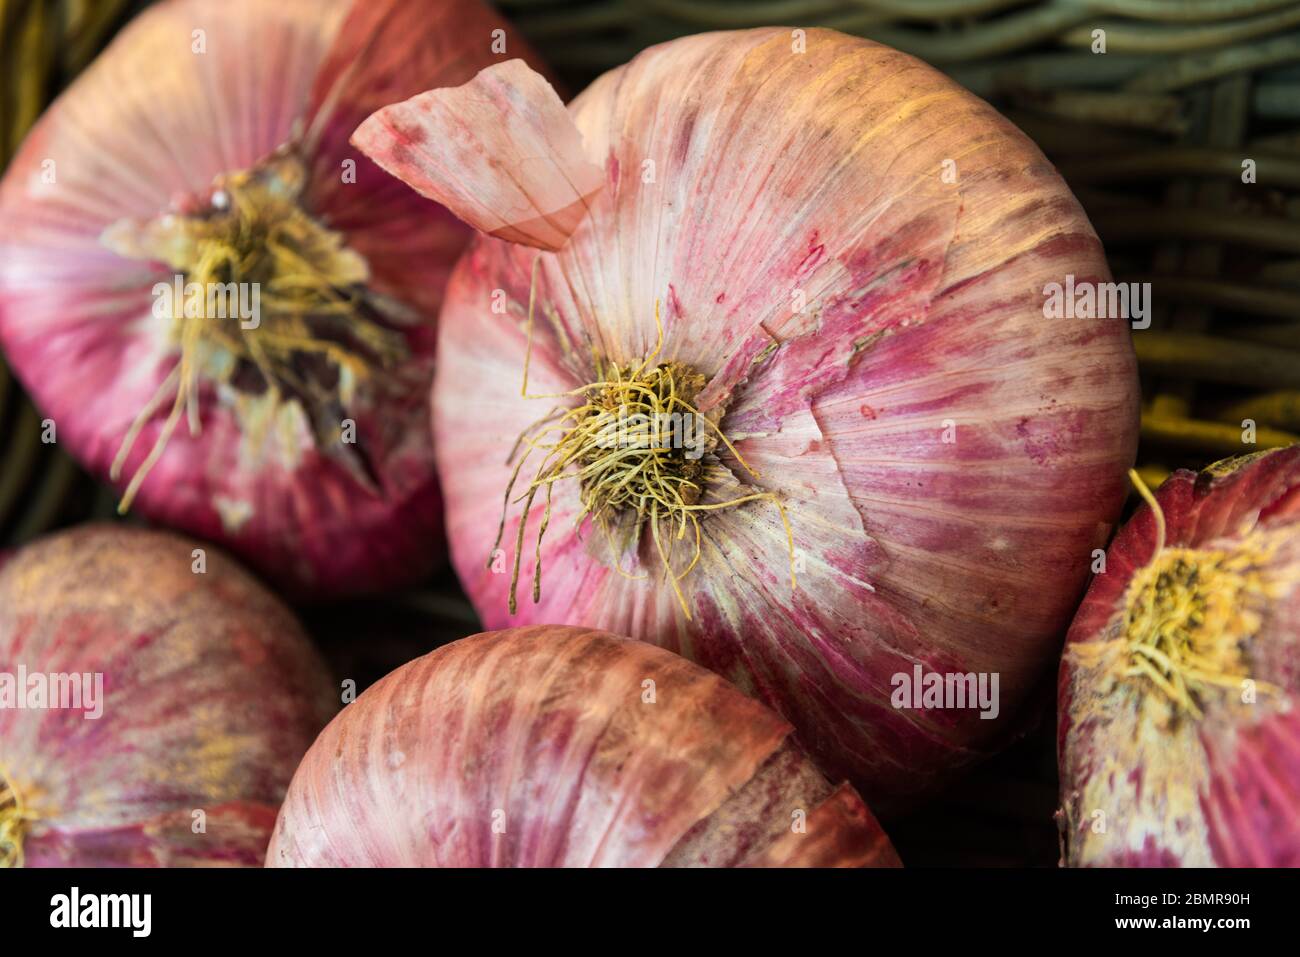 Close up food photo of organic red onions at the farmers market stall. Stock Photo